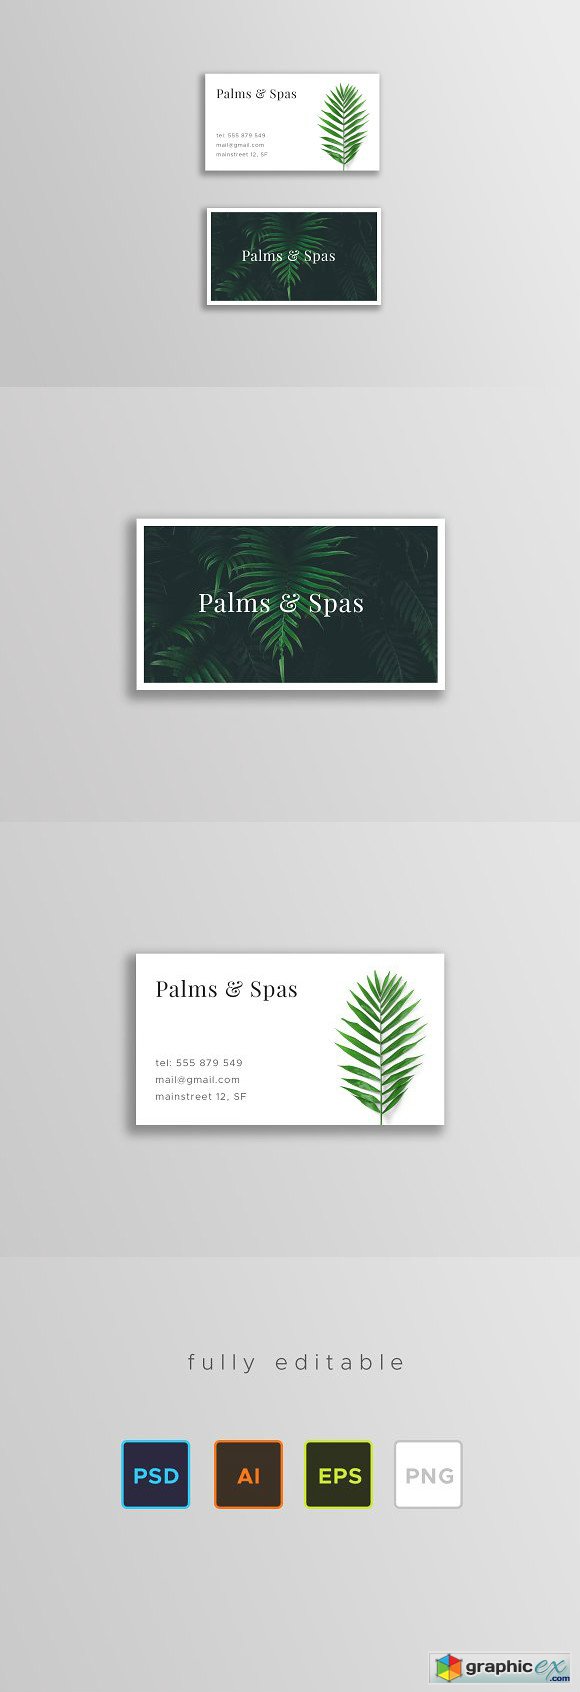 Palms and Spas Business Card